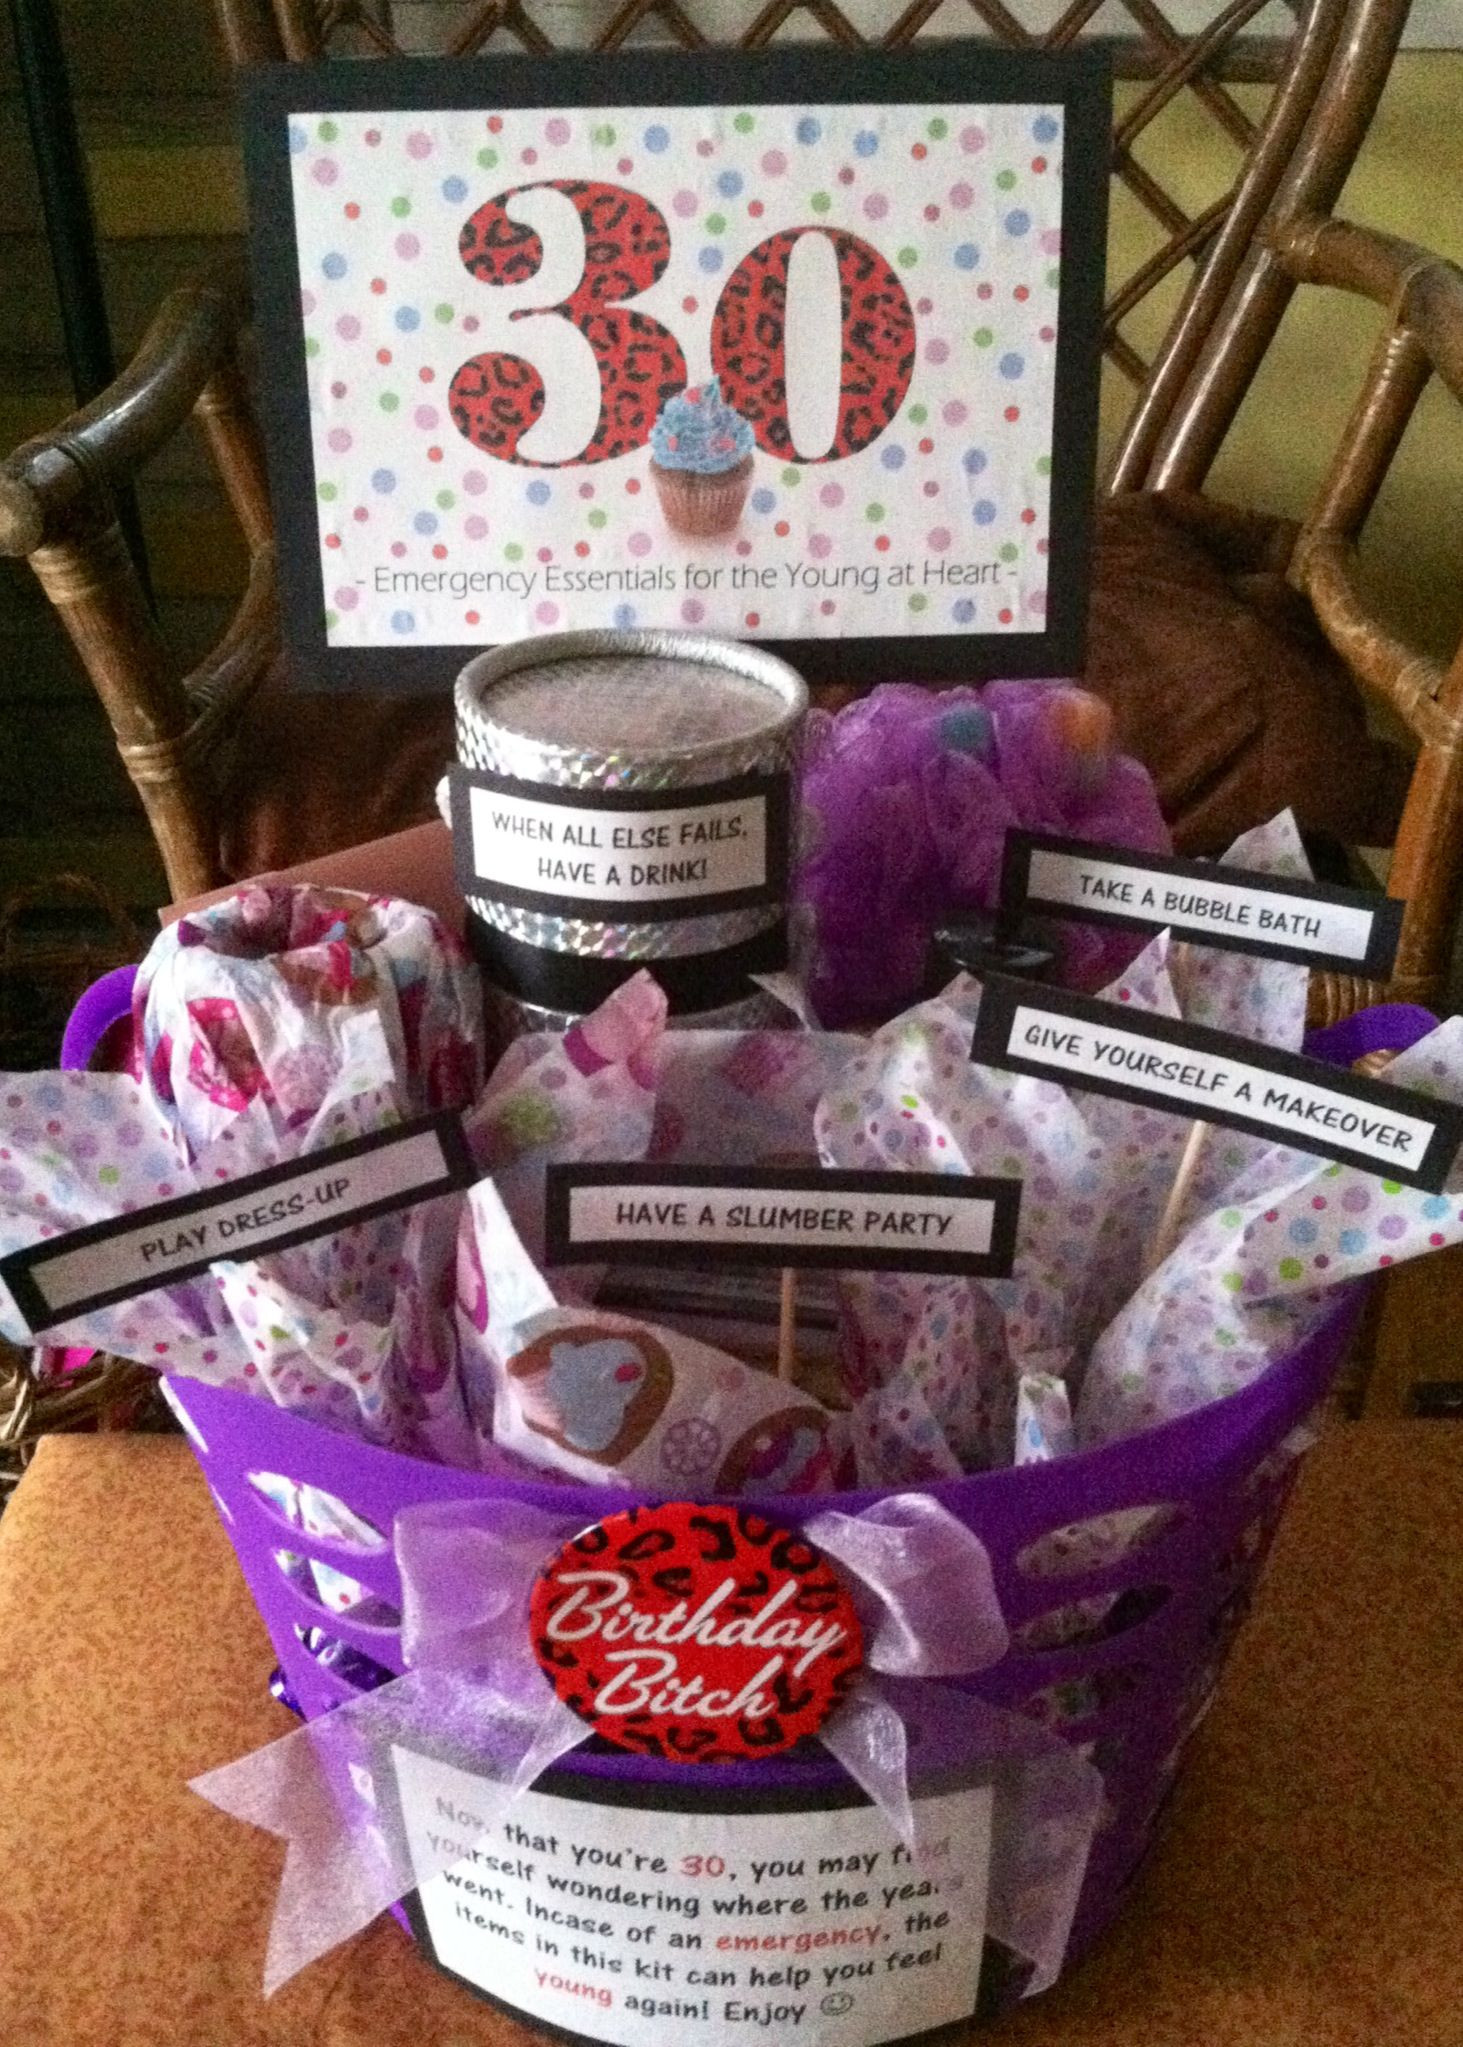 30 Gifts For 30th Birthday For Her
 30th Birthday Gift Basket 5 ts in 1 Emergency